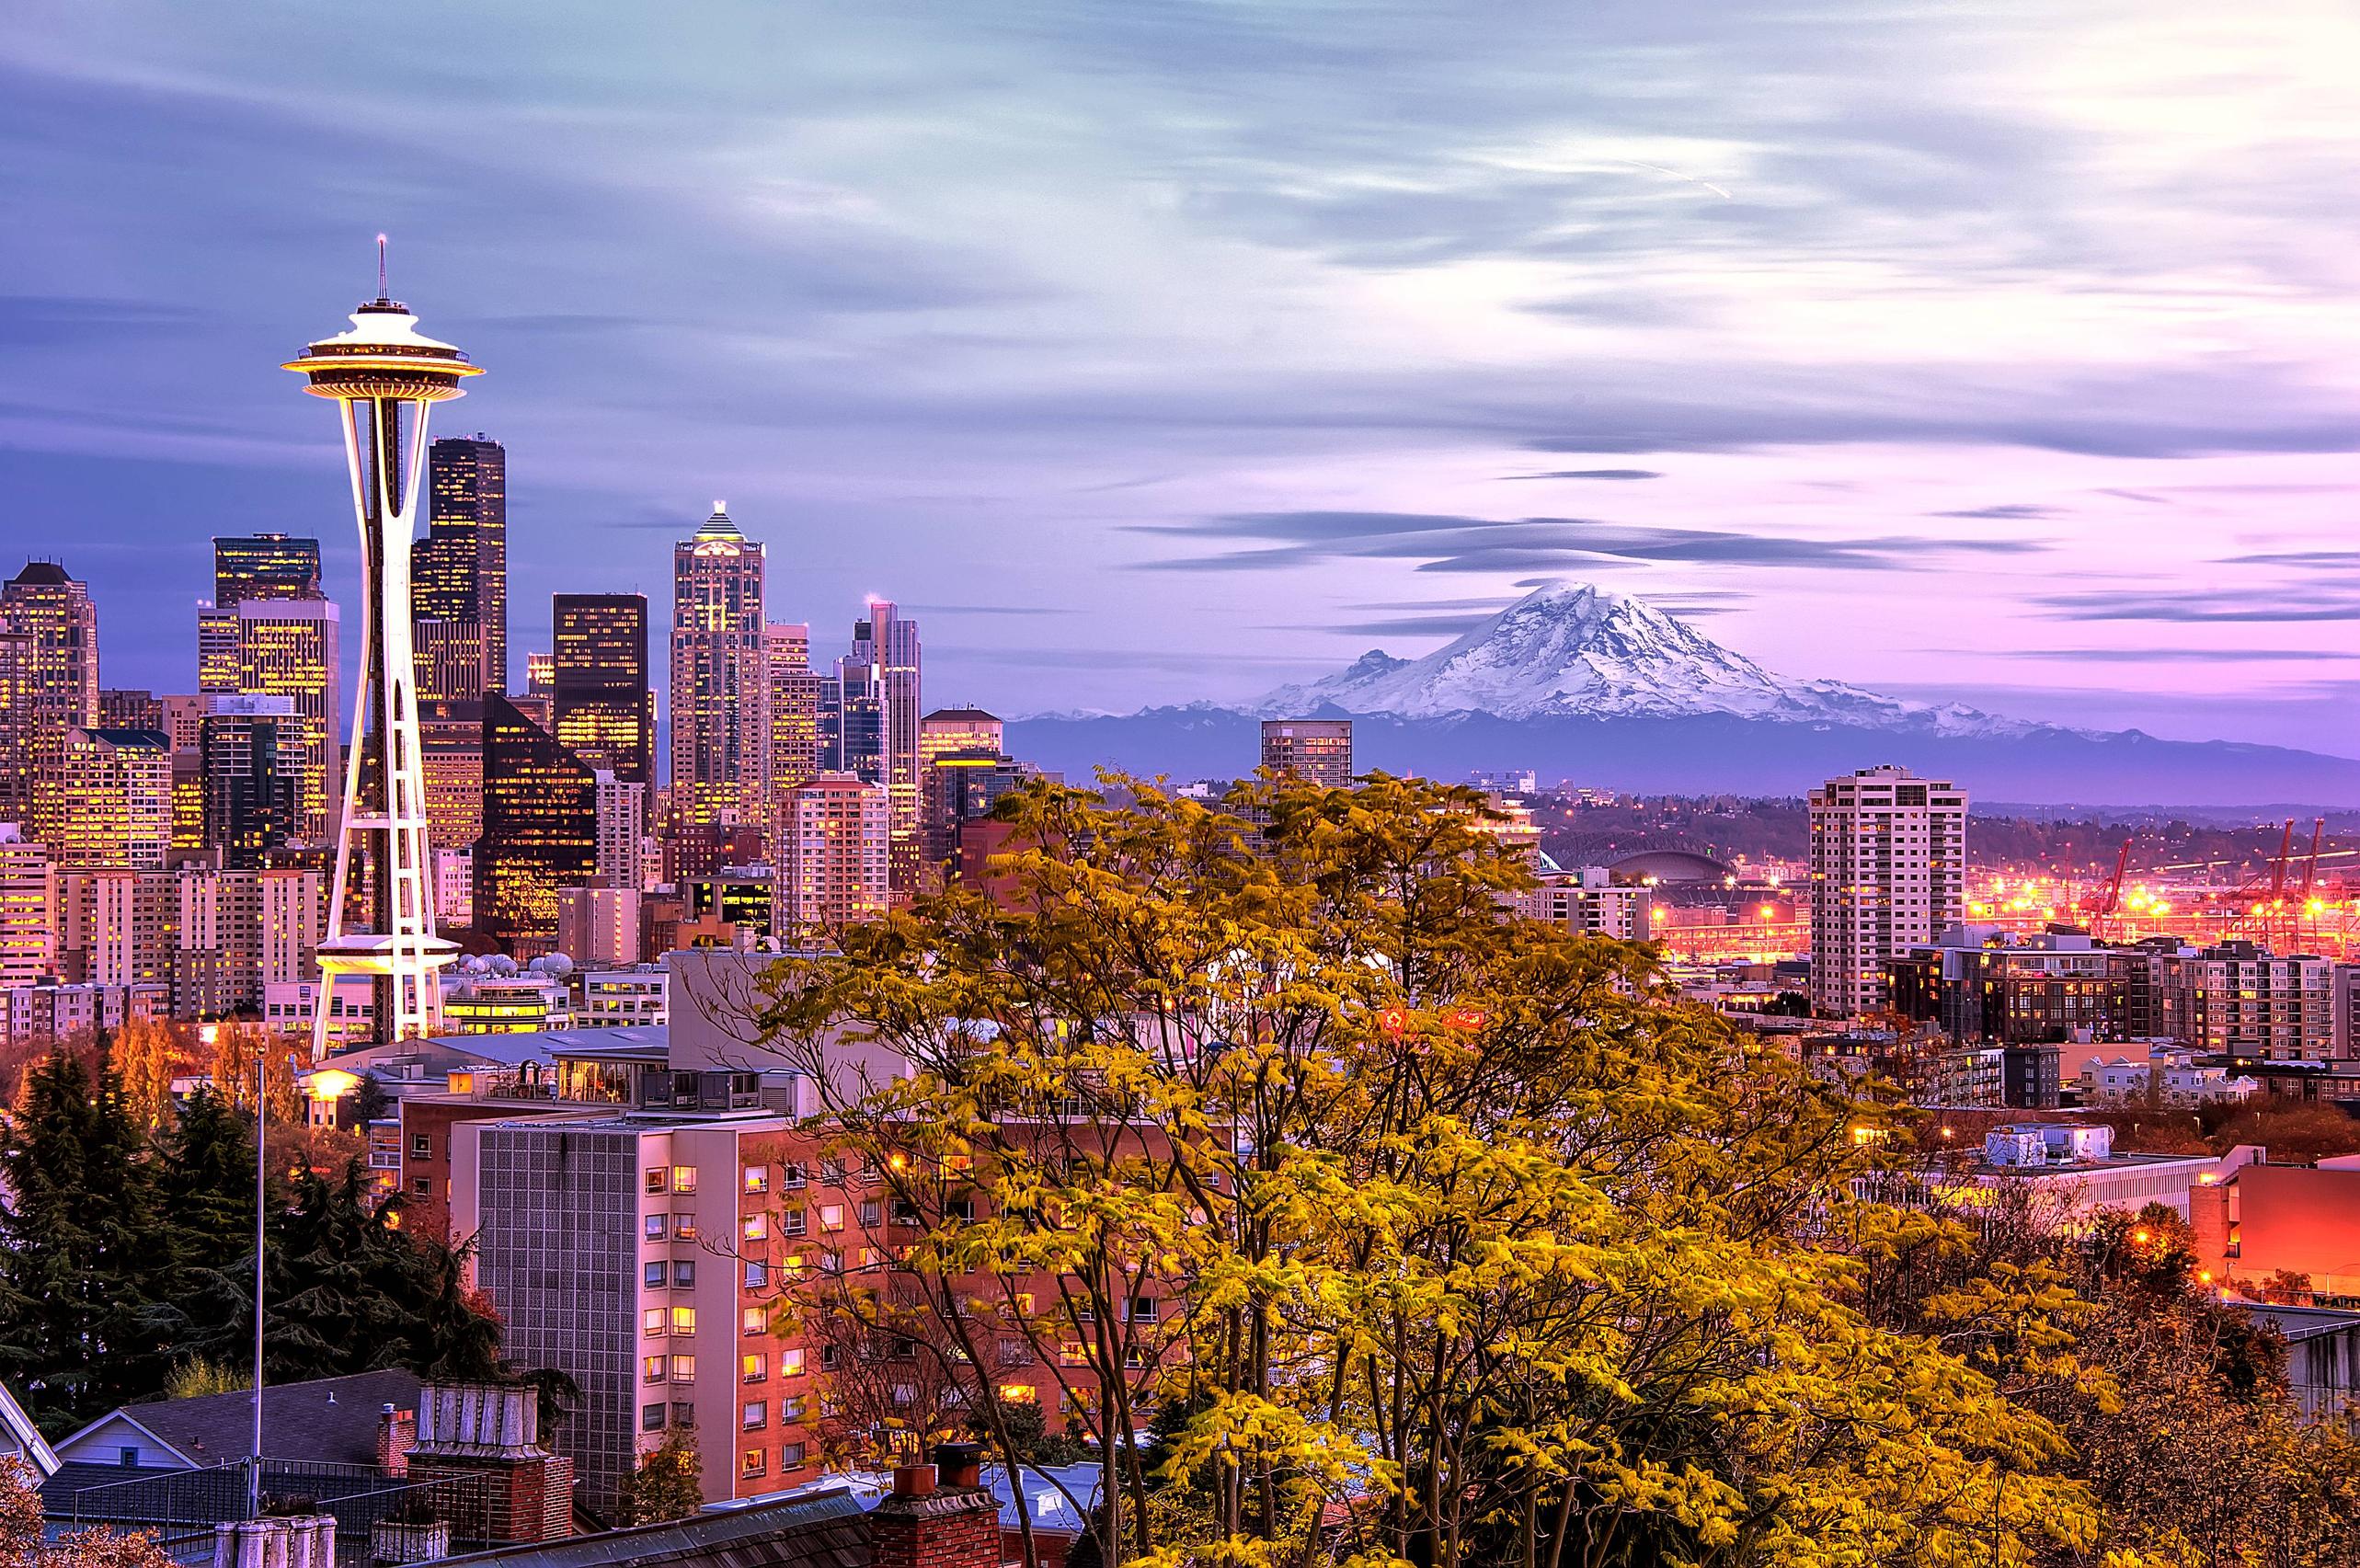 Seattle publications that may be hiring writers and freelance writers in Seattle